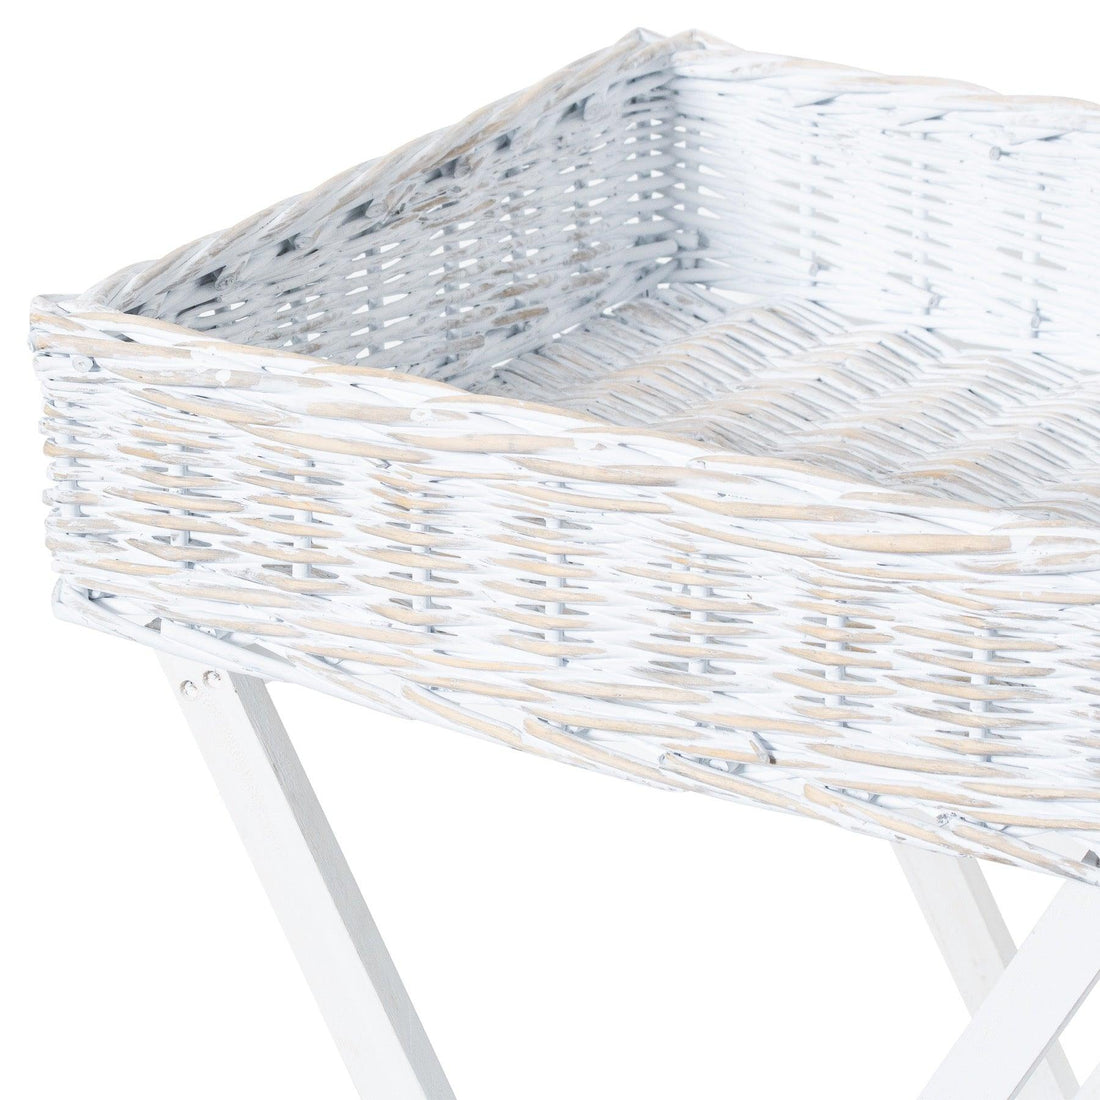 Large White Wash Wicker Basket Butler Tray - £209.0 - Furniture > Tables > Side Tables 